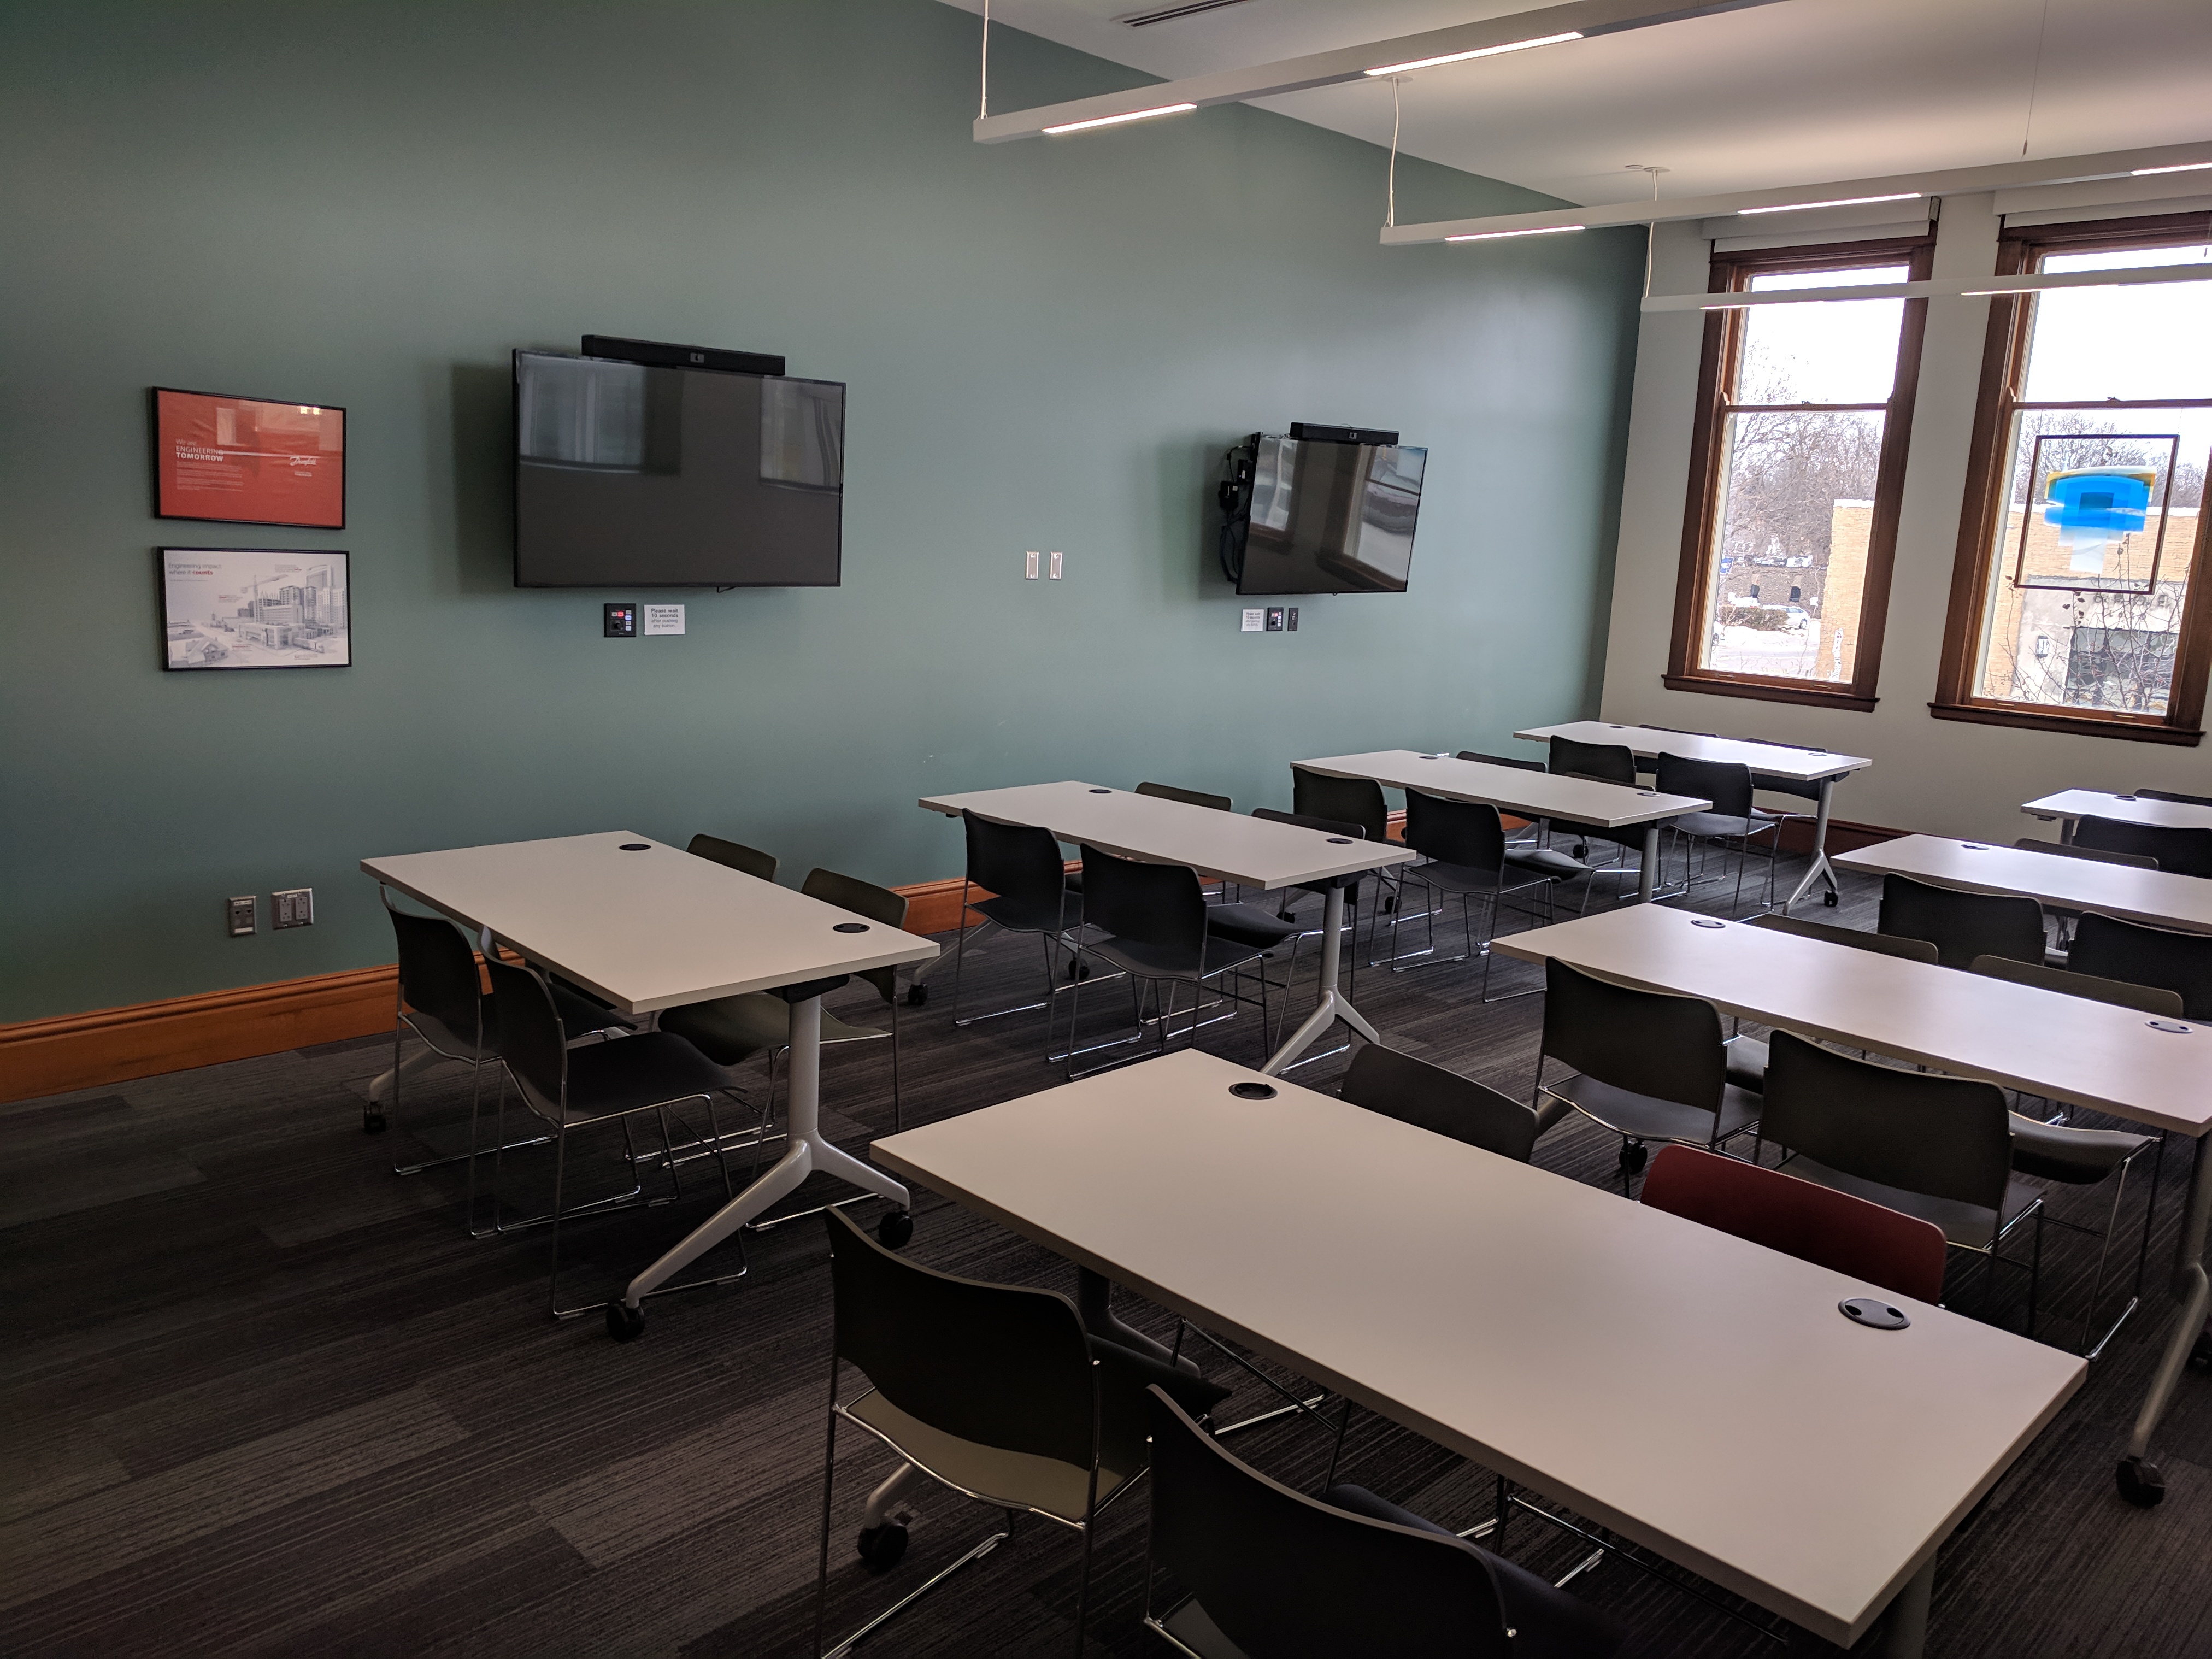 Danfoss Room with classroom style room setup and two mounted screens